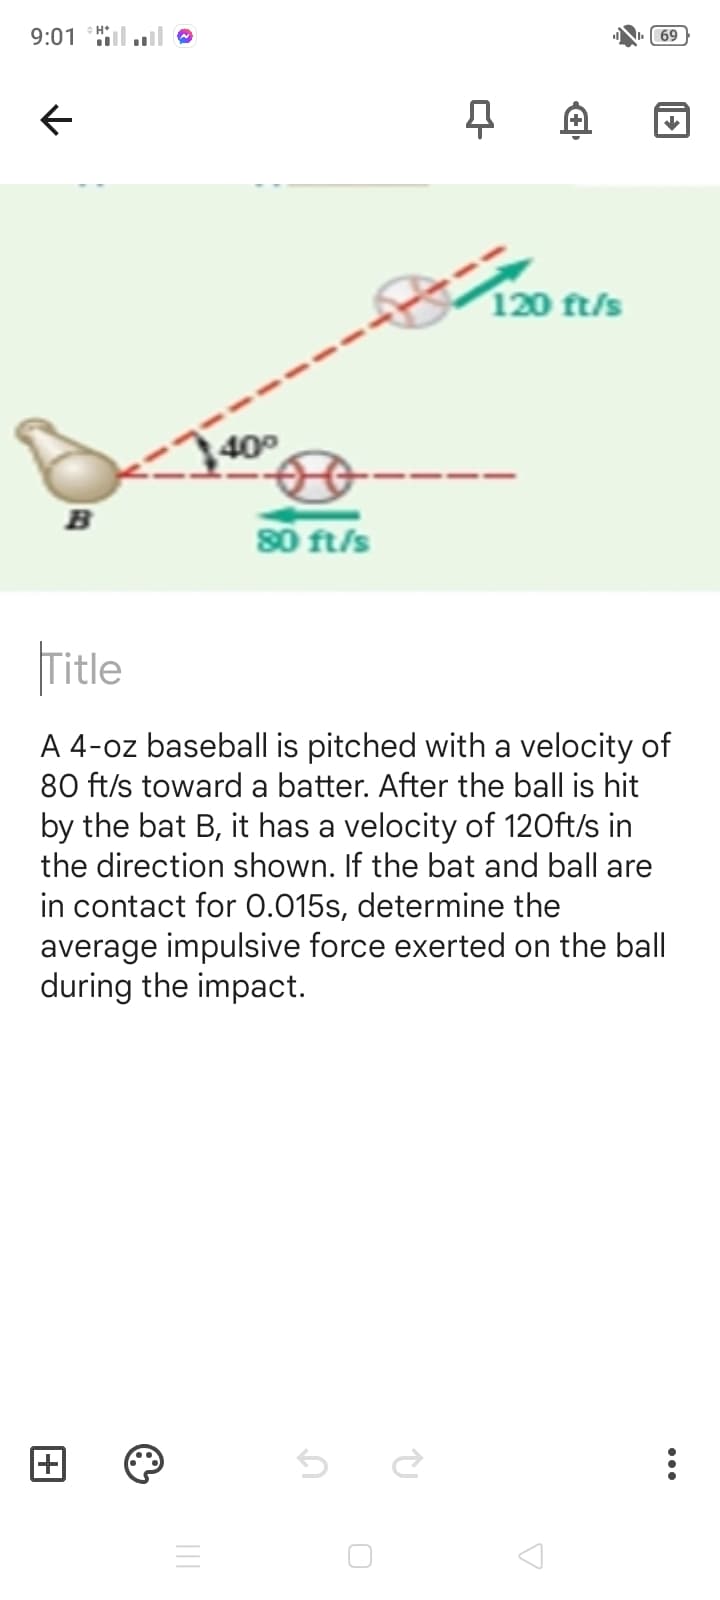 9:01 Hl.l
69
120 ft/s
400
B
80 ft/s
|Title
A 4-oz baseball is pitched with a velocity of
80 ft/s toward a batter. After the ball is hit
by the bat B, it has a velocity of 120ft/s in
the direction shown. If the bat and ball are
in contact for 0.015s, determine the
average impulsive force exerted on the ball
during the impact.
